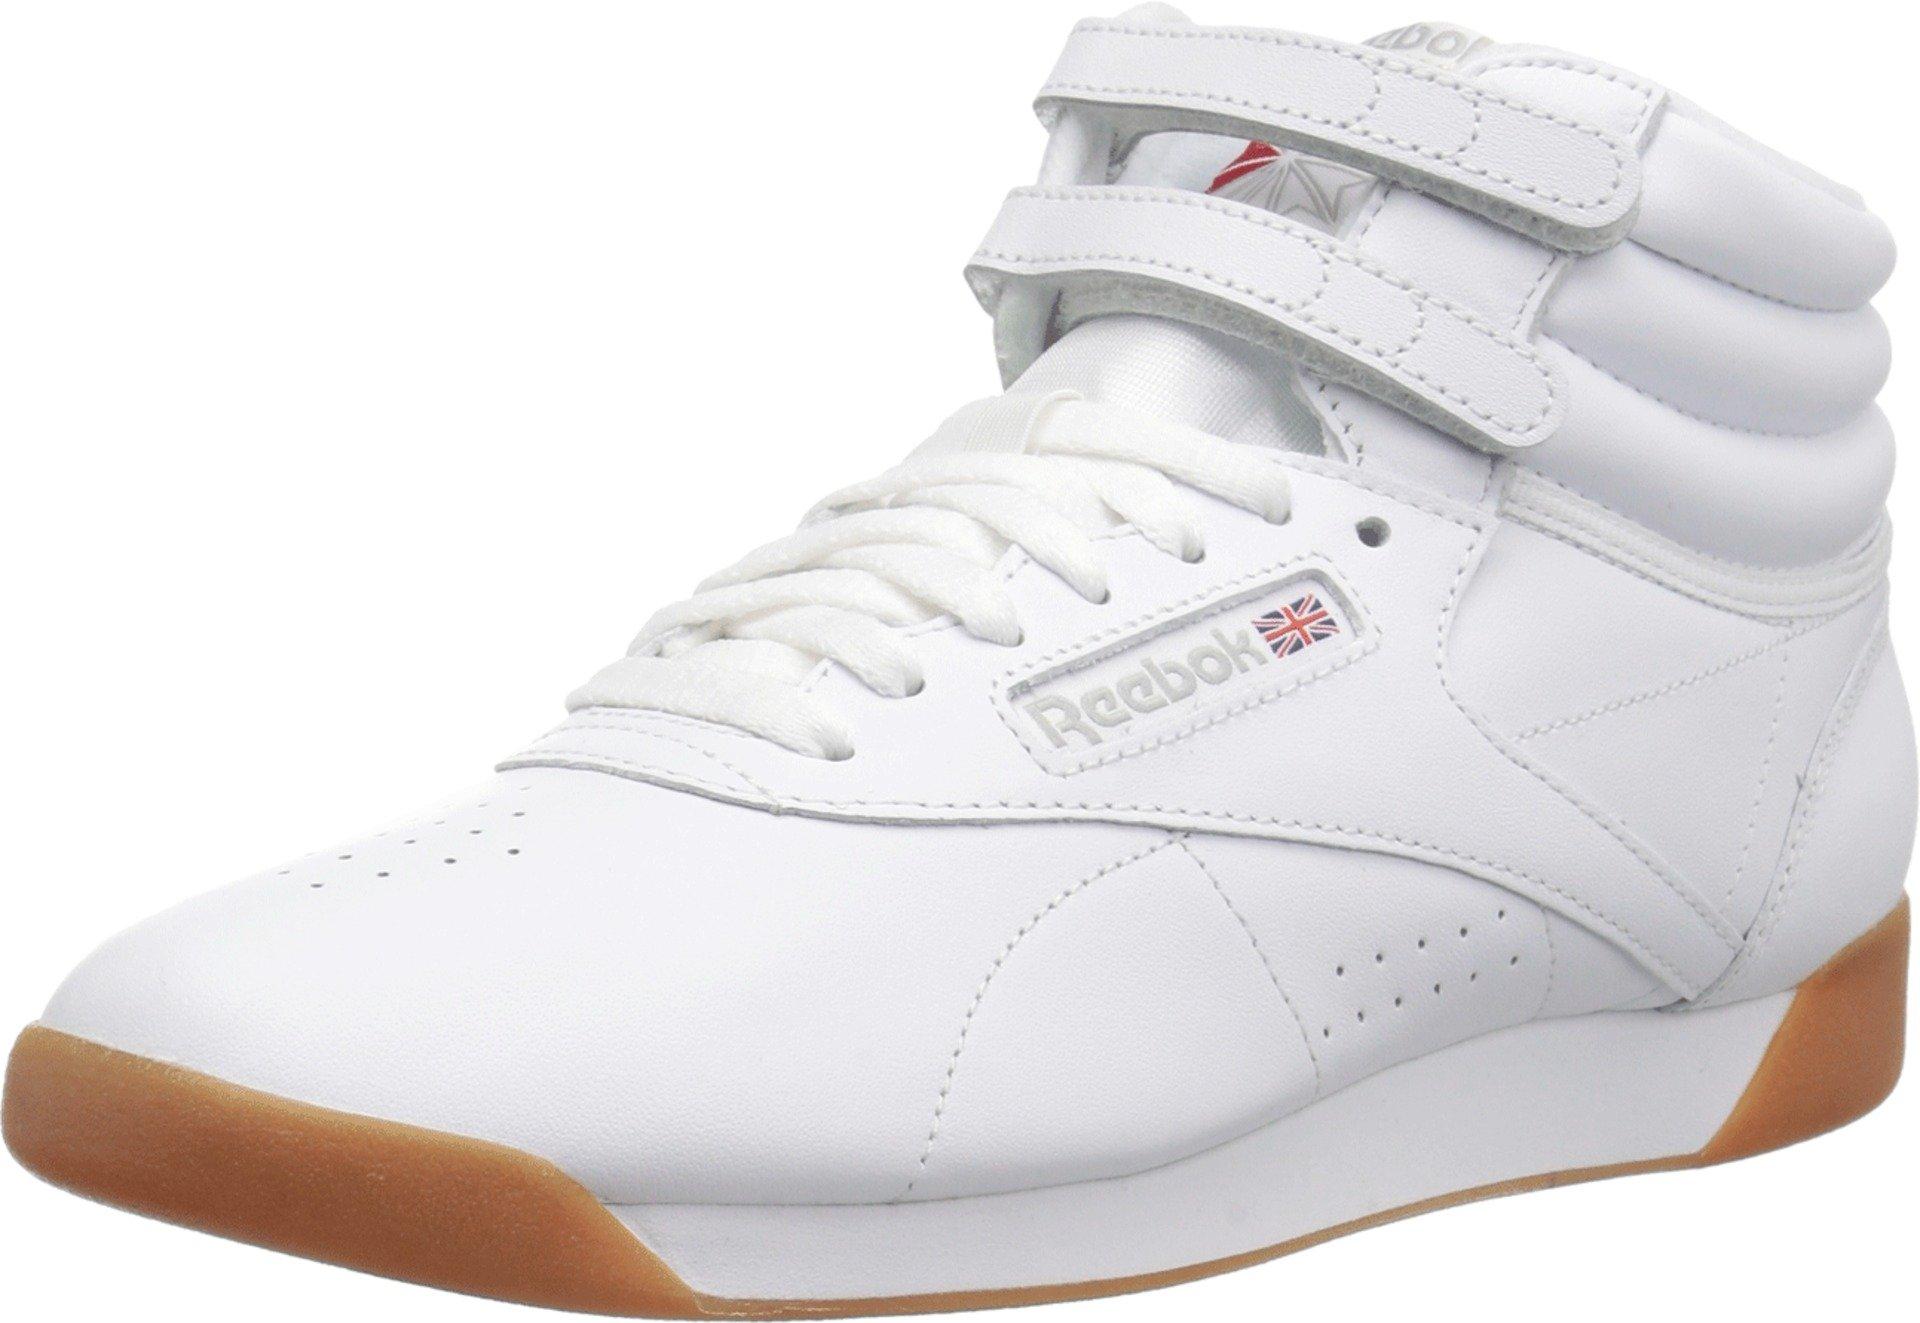 Reebok Freestyle Hi Training Shoes in White - Save 16% - Lyst